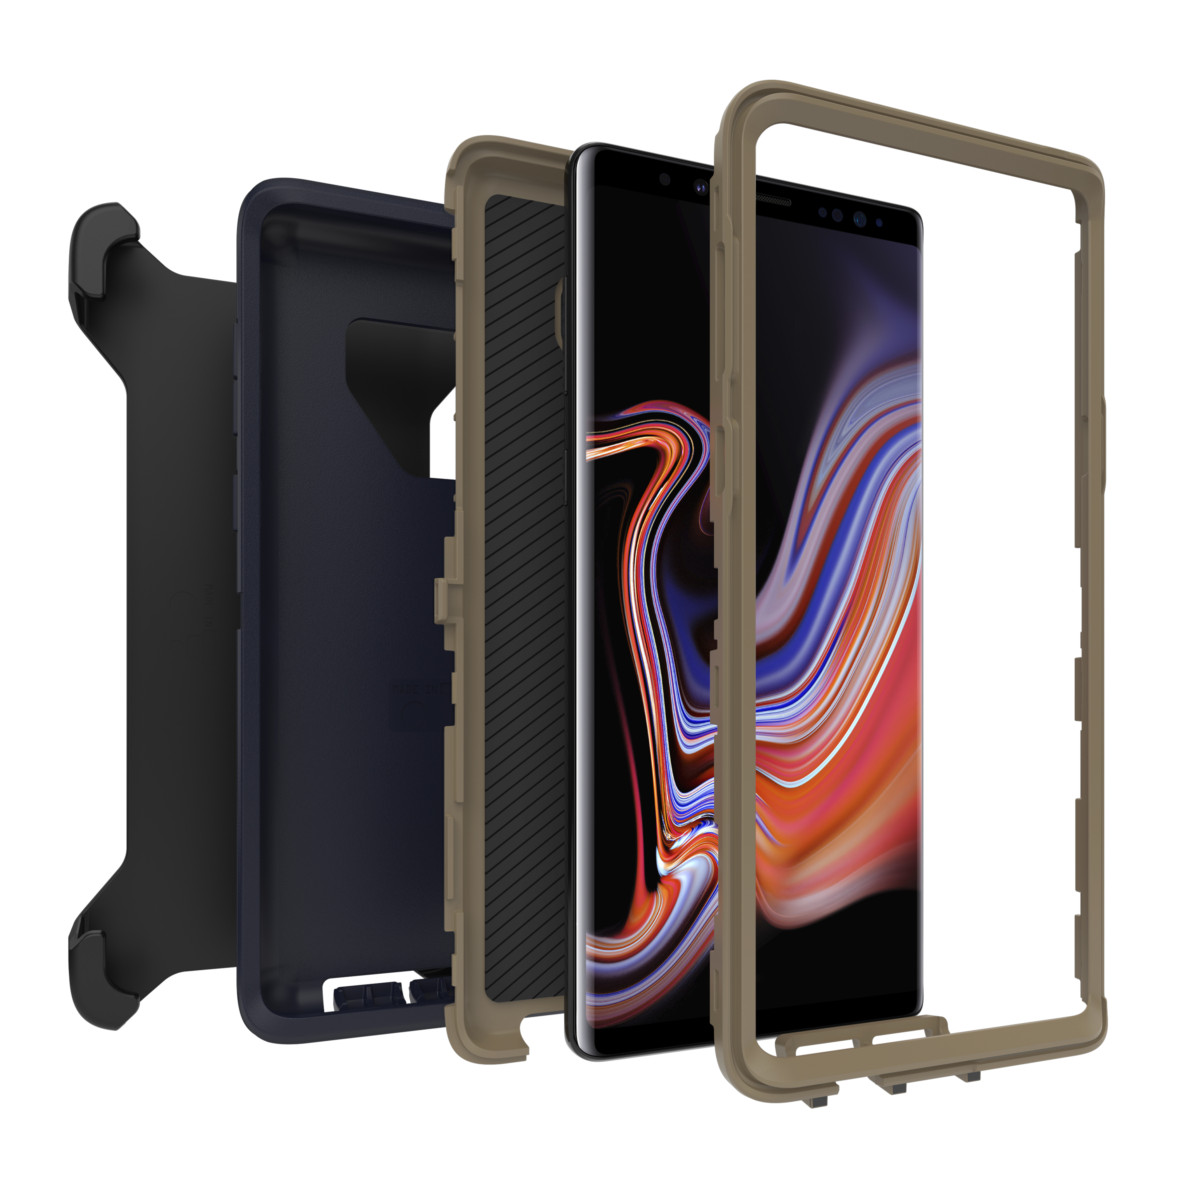 Otterbox Symmetry, Commuter and Defender Galaxy Note9 casings now available in Malaysia 5